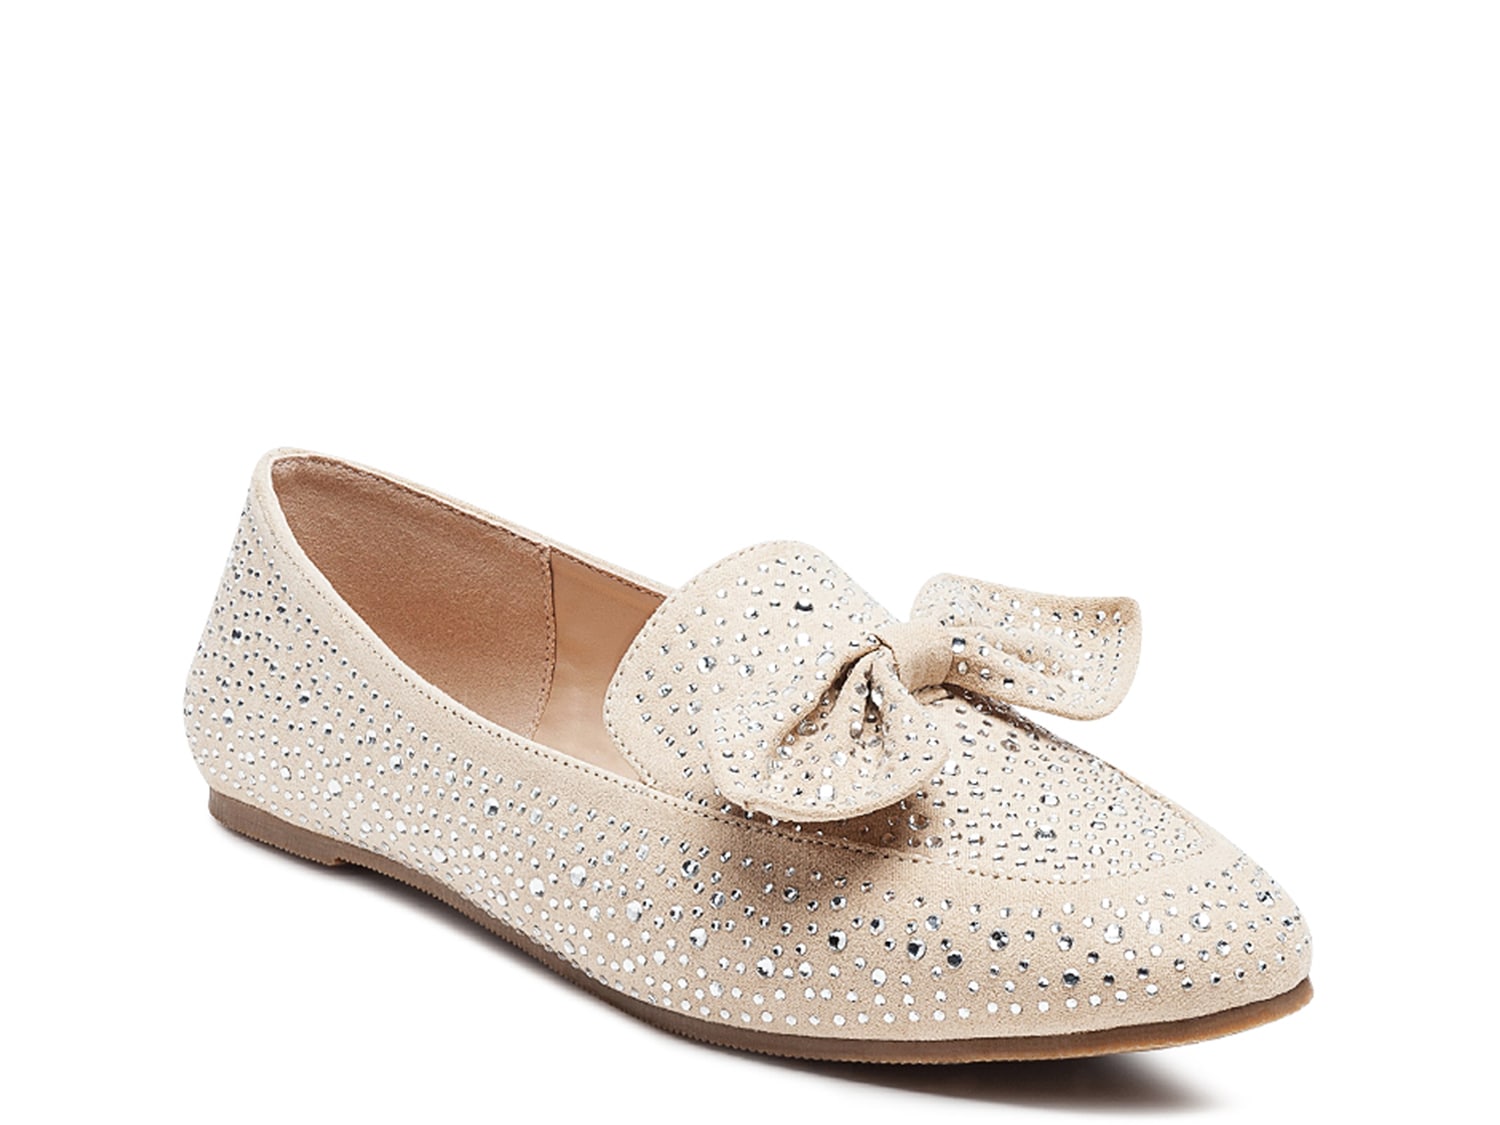 London Rag Bowtop Loafer - Free Shipping | DSW